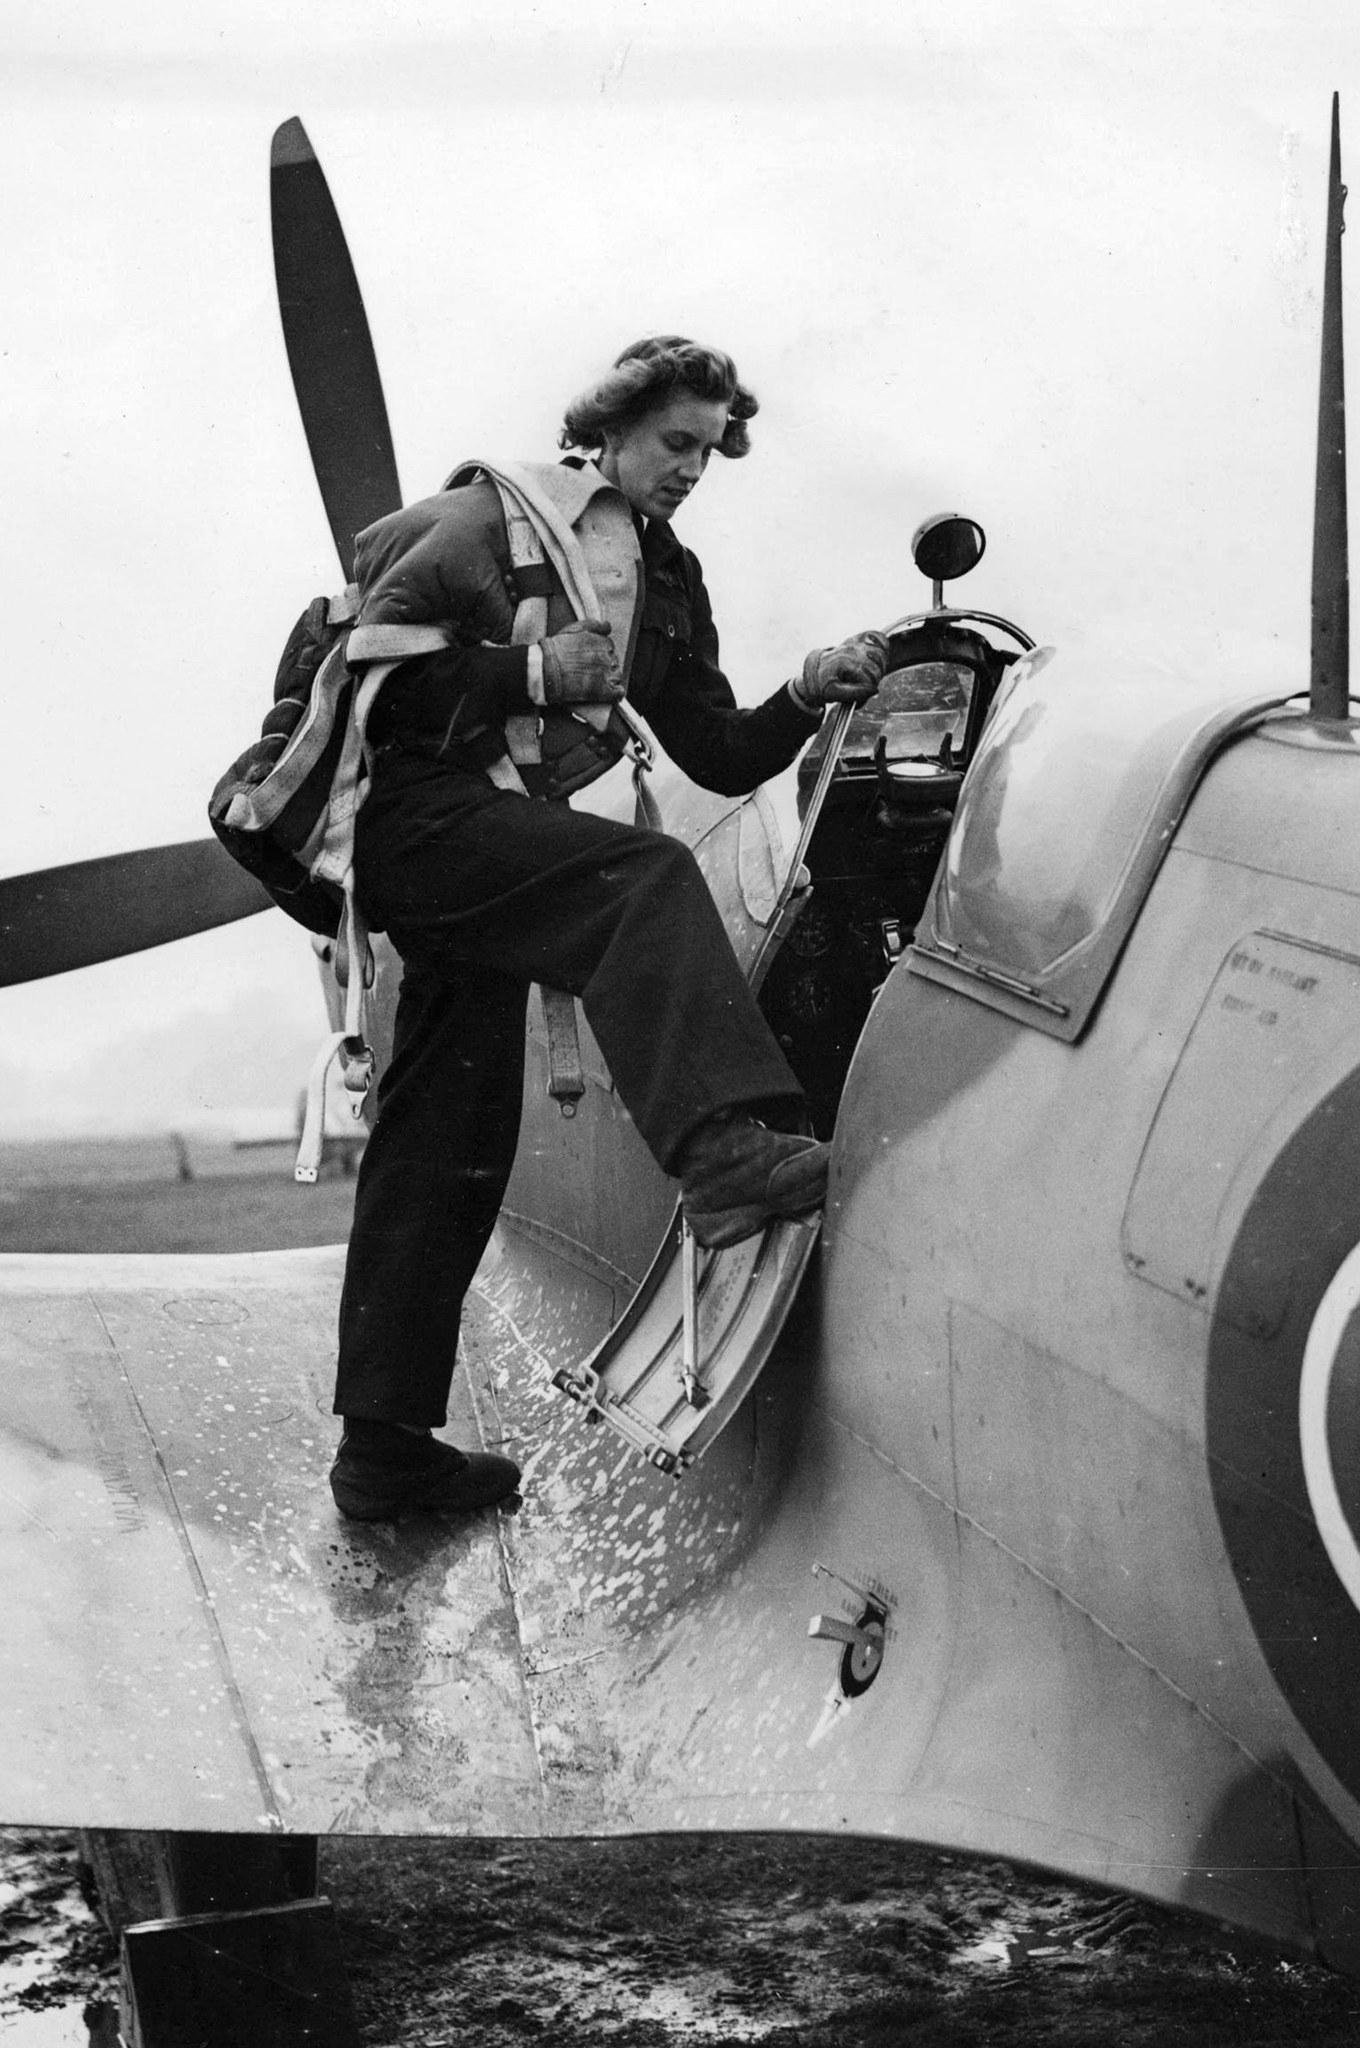 Pilot Lettice Curtis with a Spitfire during World War II